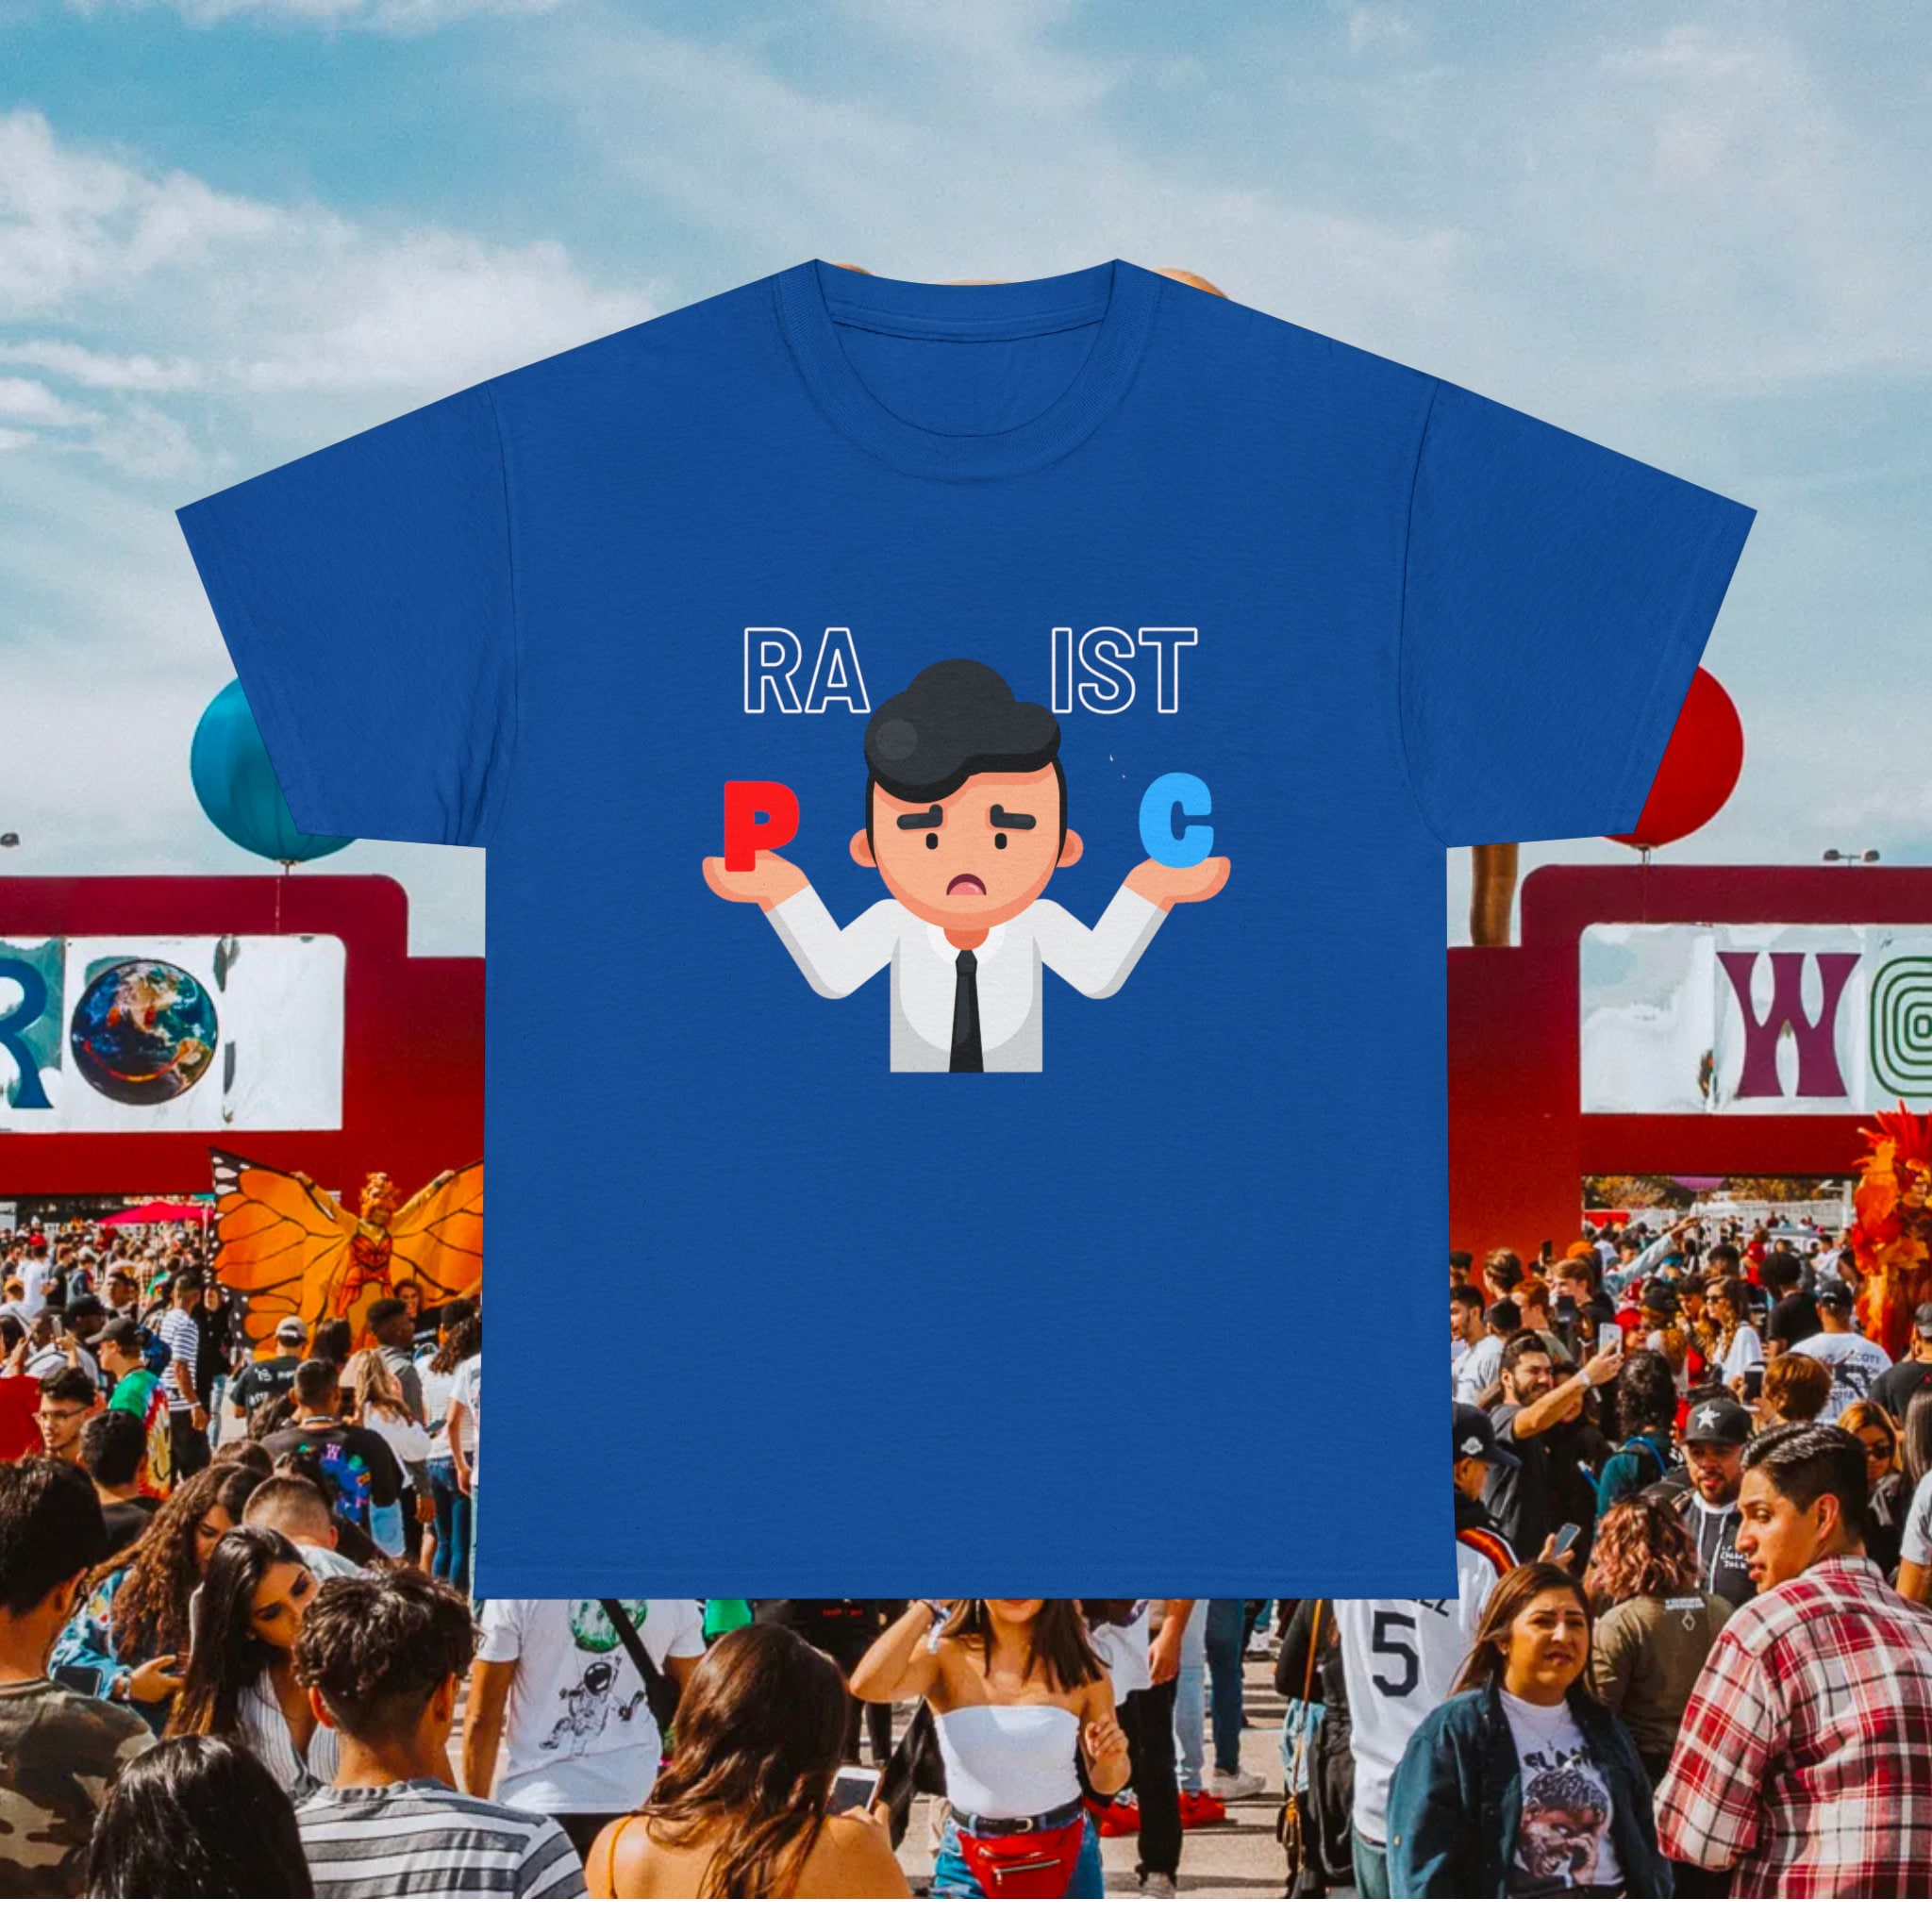 Create meme t shirts roblox Halloween, t-shirt get - Pictures 